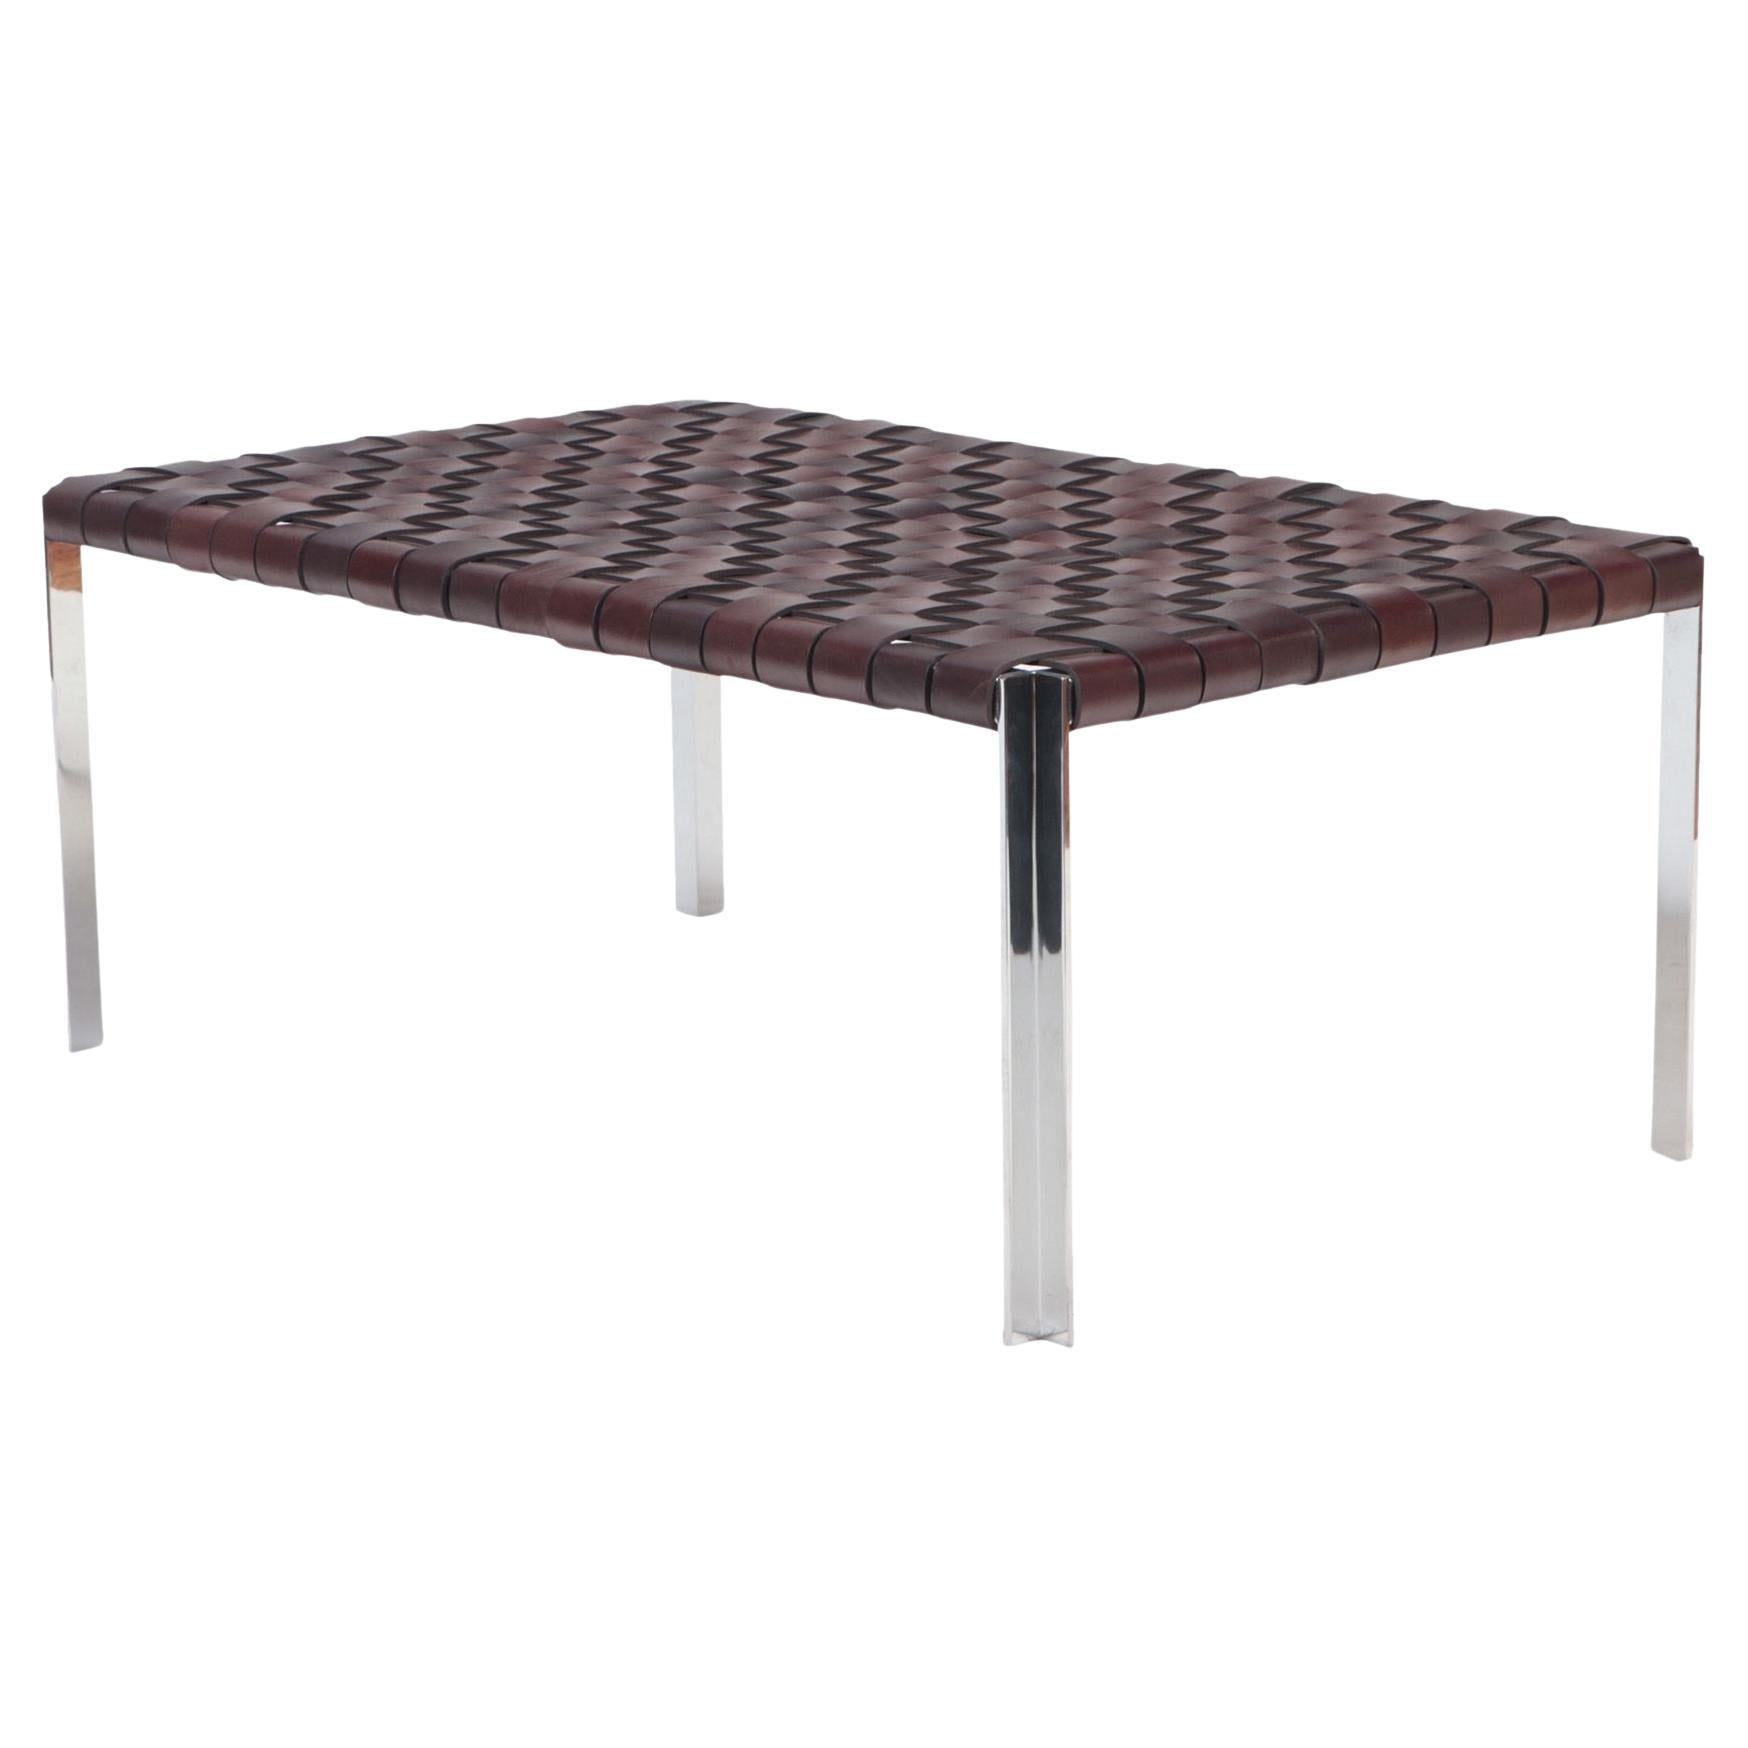  Dark brown leather with polished chrome finish bench. Contemporary